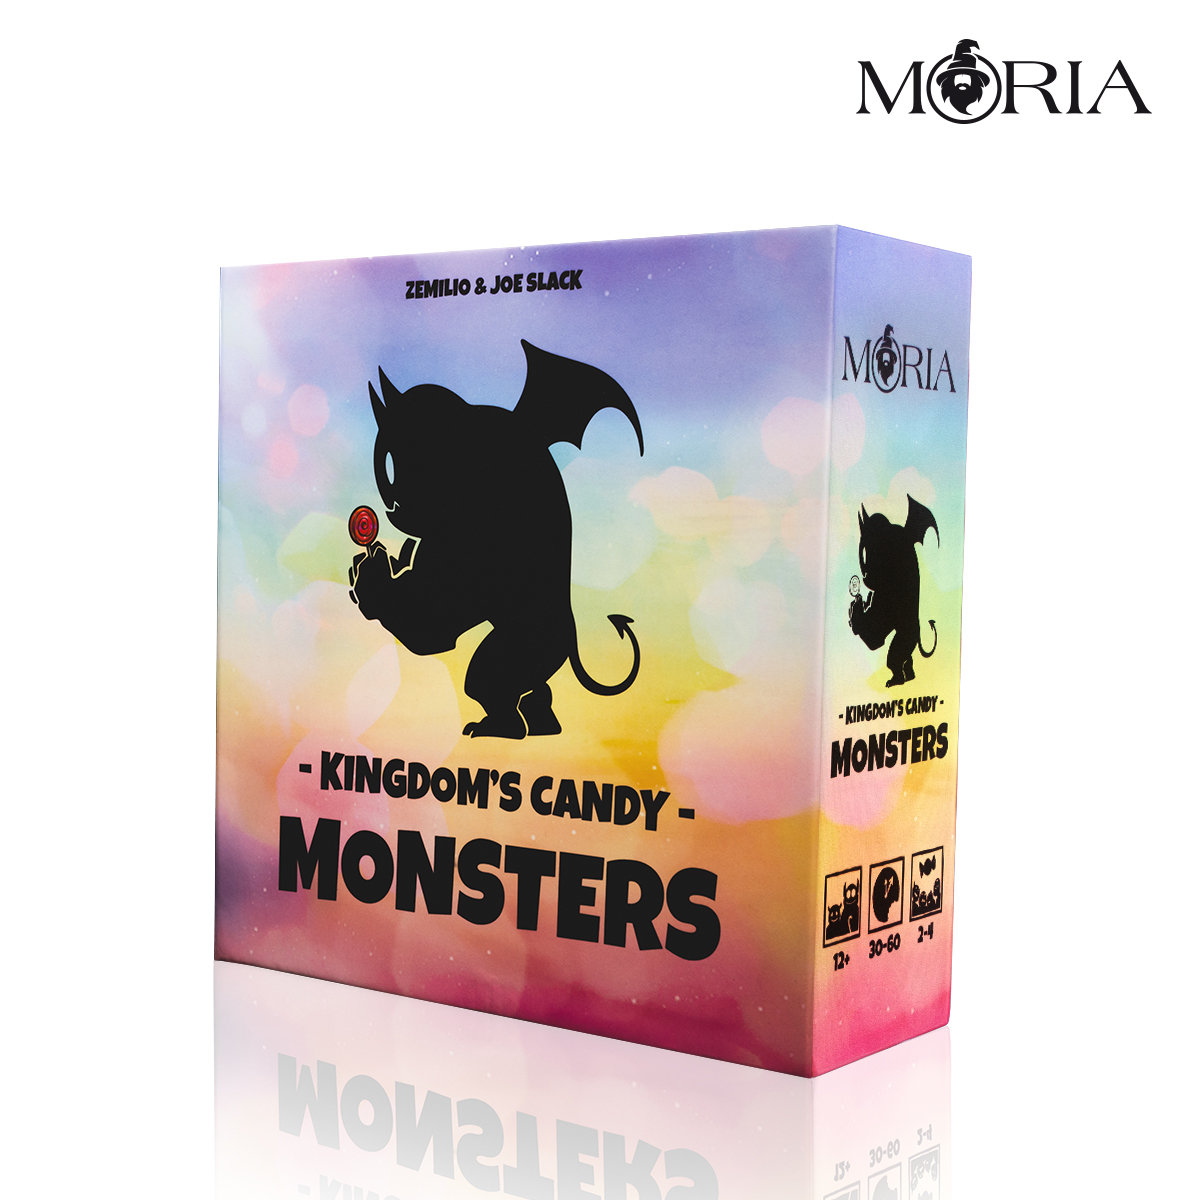 Moria Kingdom's Candy Monsters